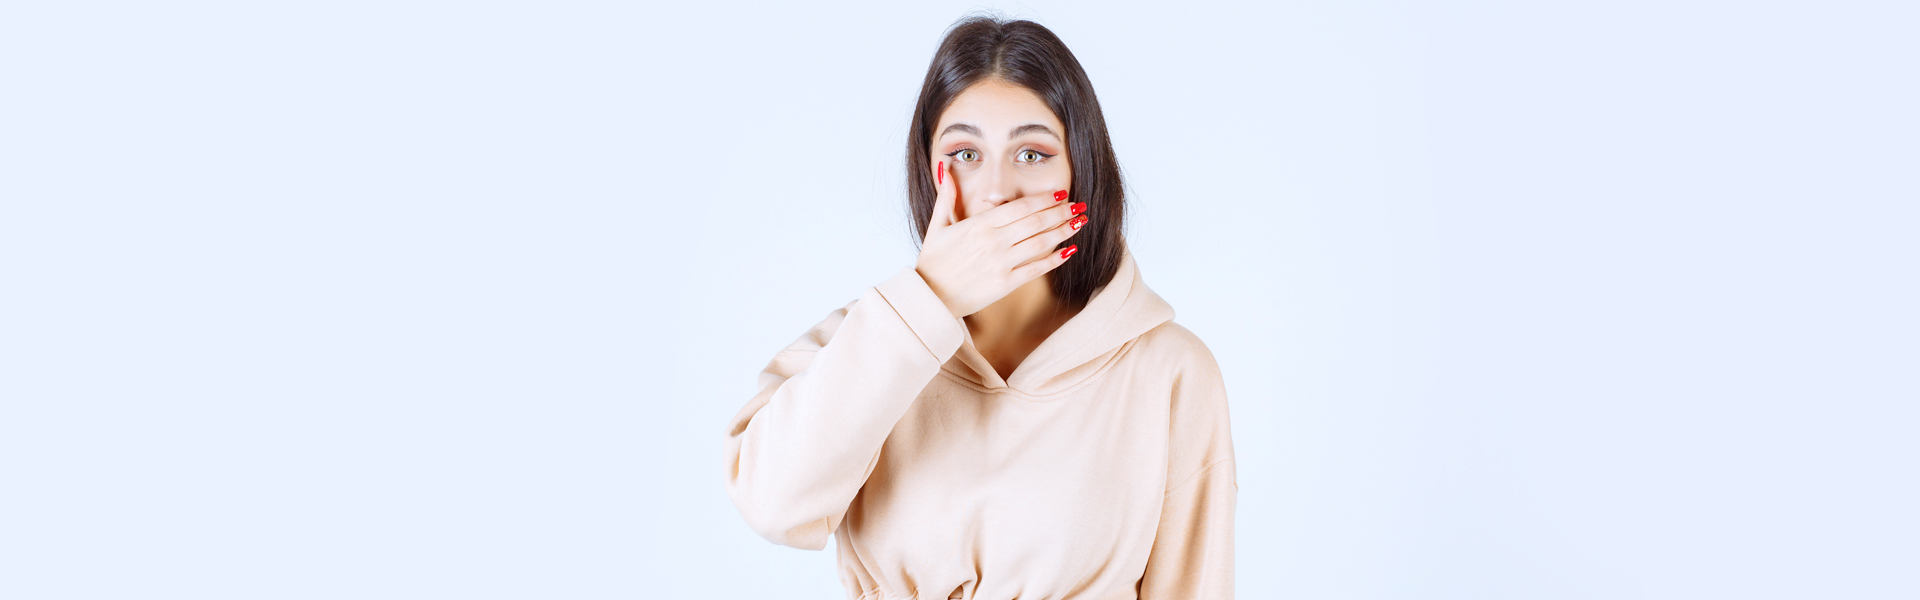 How Do You Treat Bad Breaths or Halitosis?